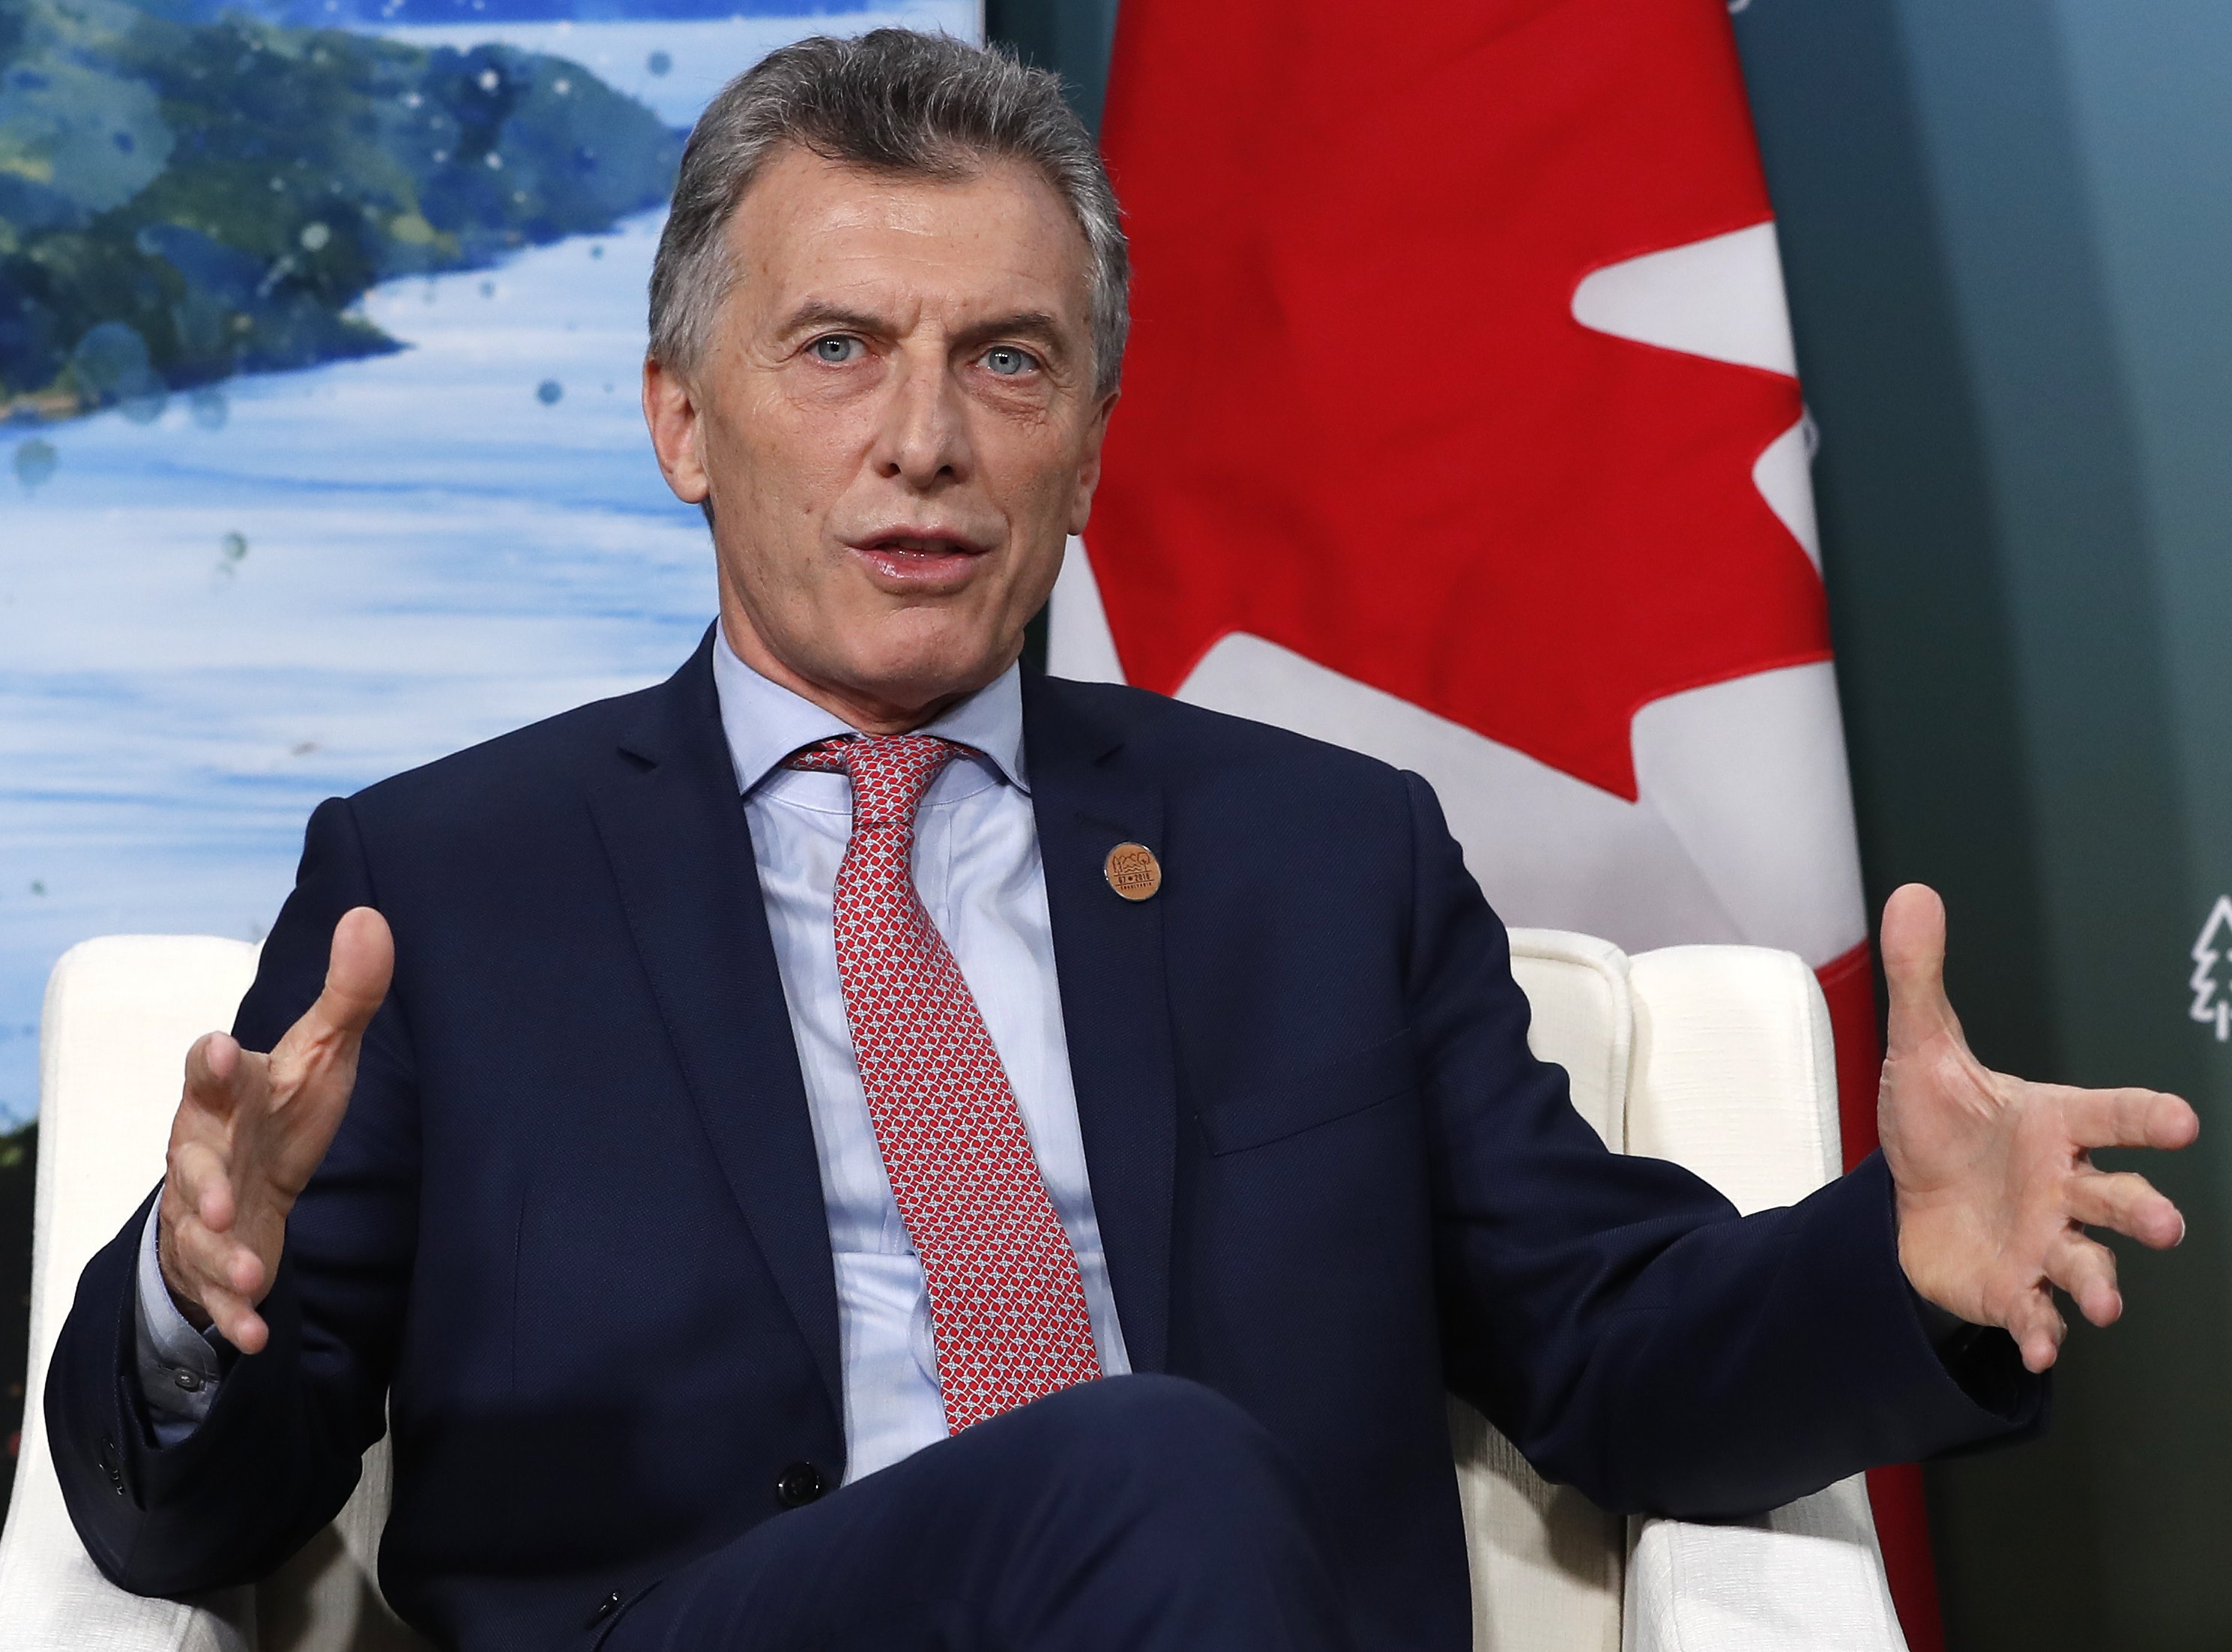 Argentina's President Mauricio Macri speaks during a meeting with Canada's Prime Minister Justin Trudeau at a G7 Summit in the Charlevoix town of La Malbaie